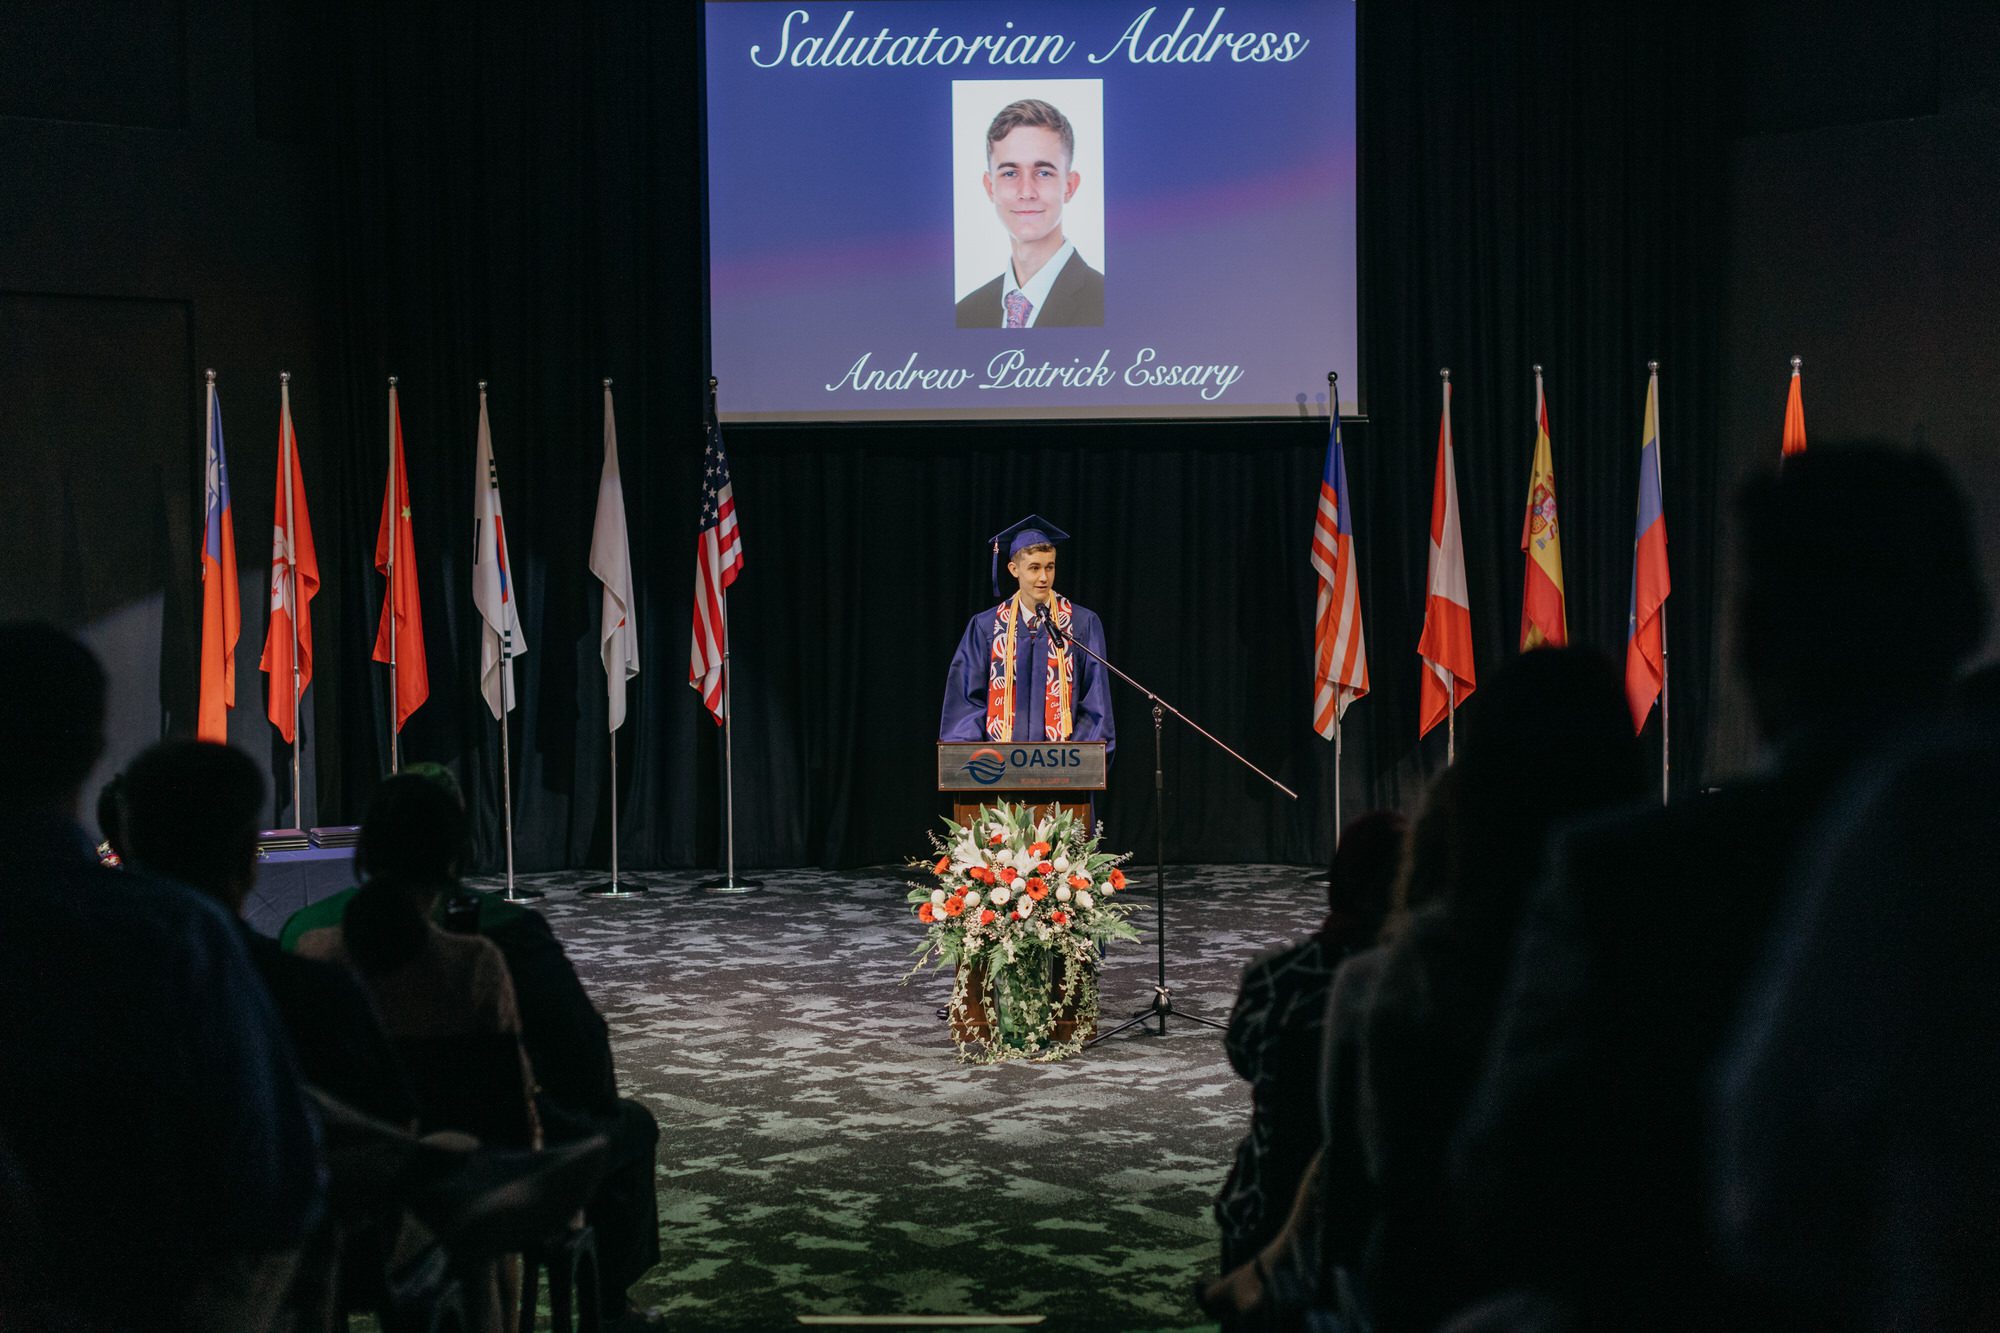 student addressing the audience with passion and enthusiasm, delivering a memorable salutatorian speech at the Oasis International School 2023 graduation ceremony.